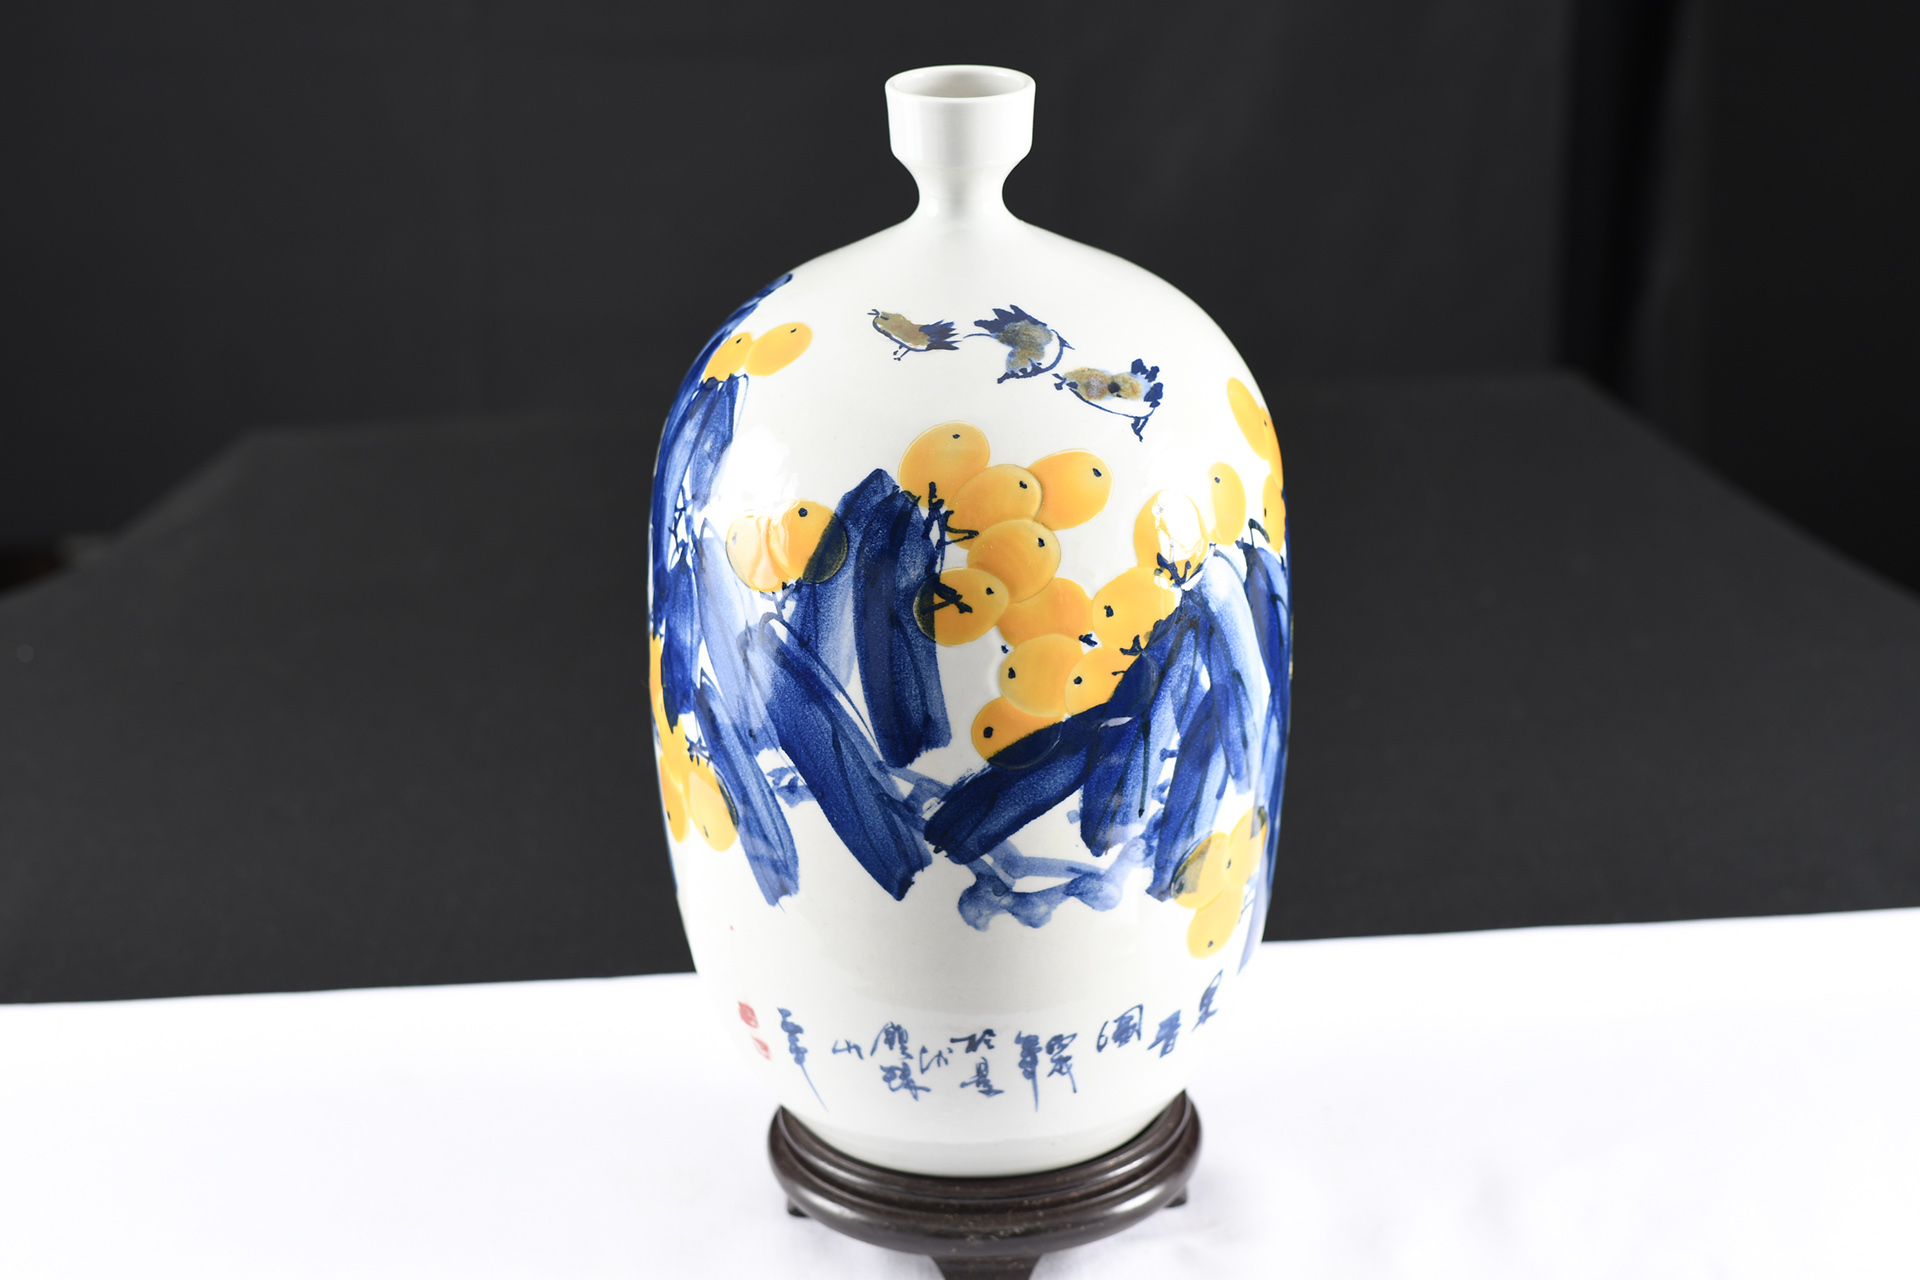 White Porcelain Vase with Hand Painted Yellow and Blue Floral Design